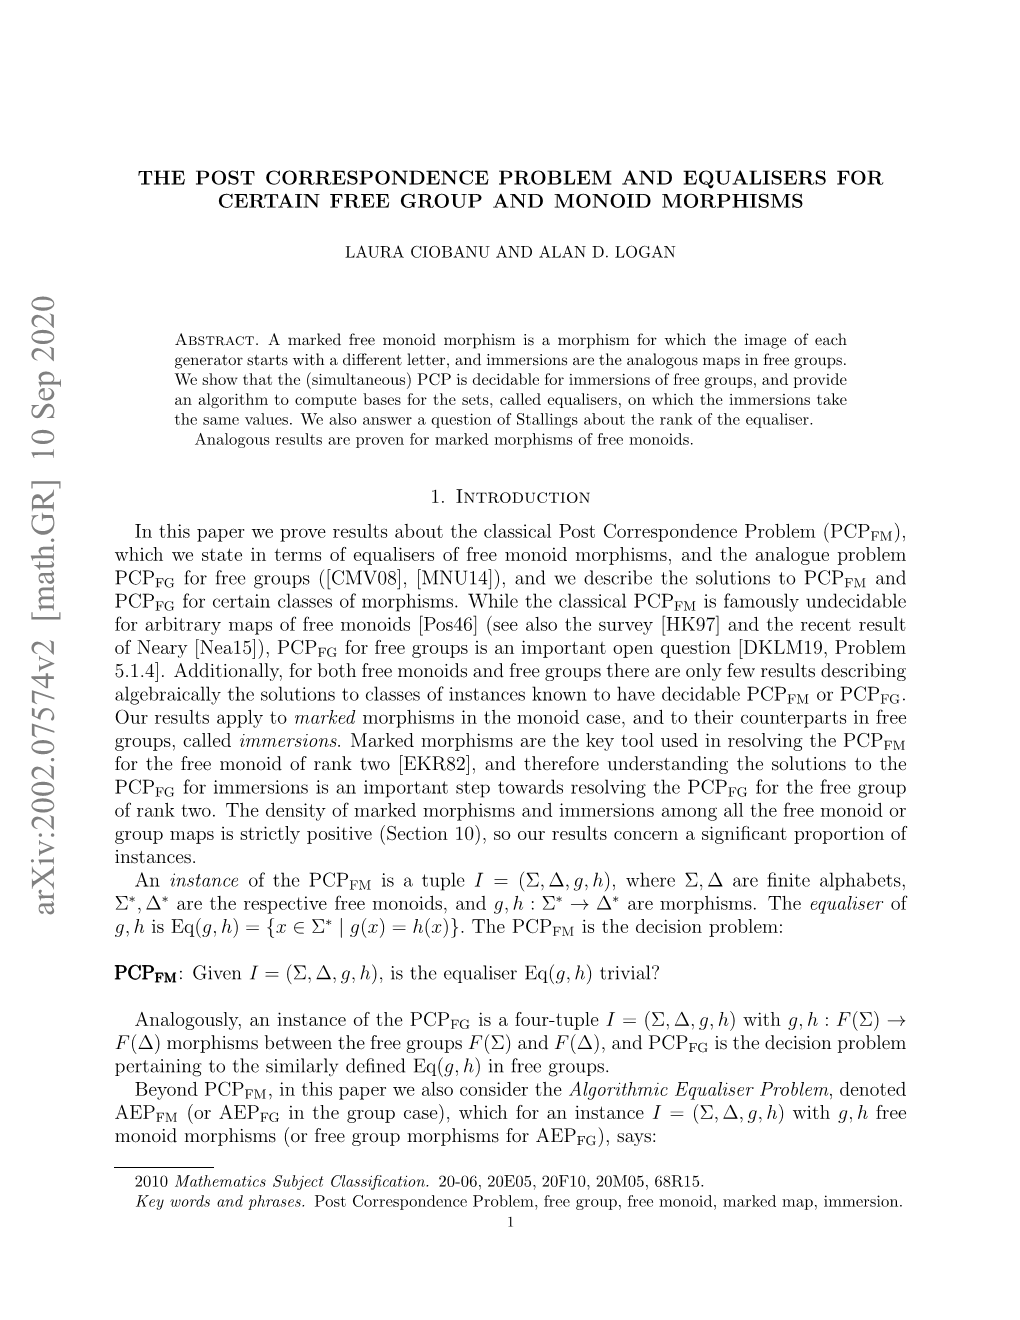 The Post Correspondence Problem and Equalisers for Certain Free Group and Monoid Morphisms